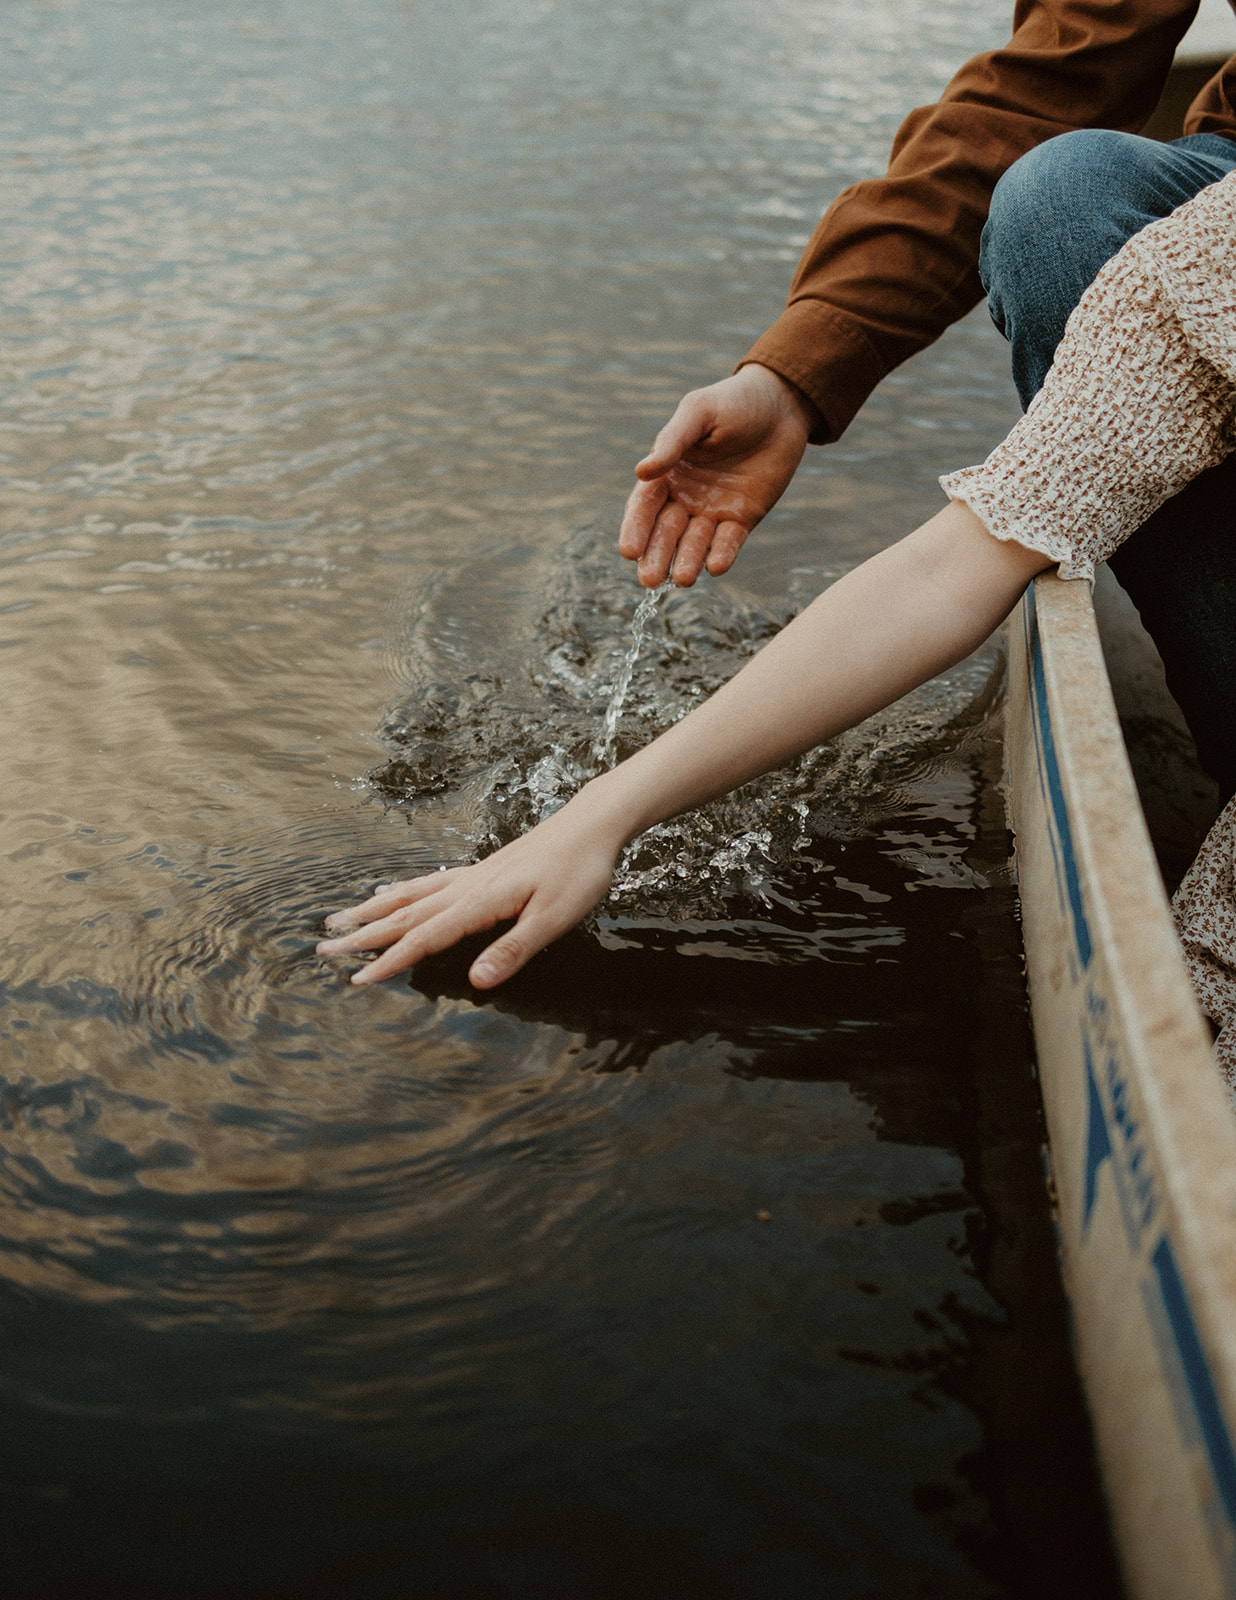 the couples hands gently touch the lake water as they float in their canoe